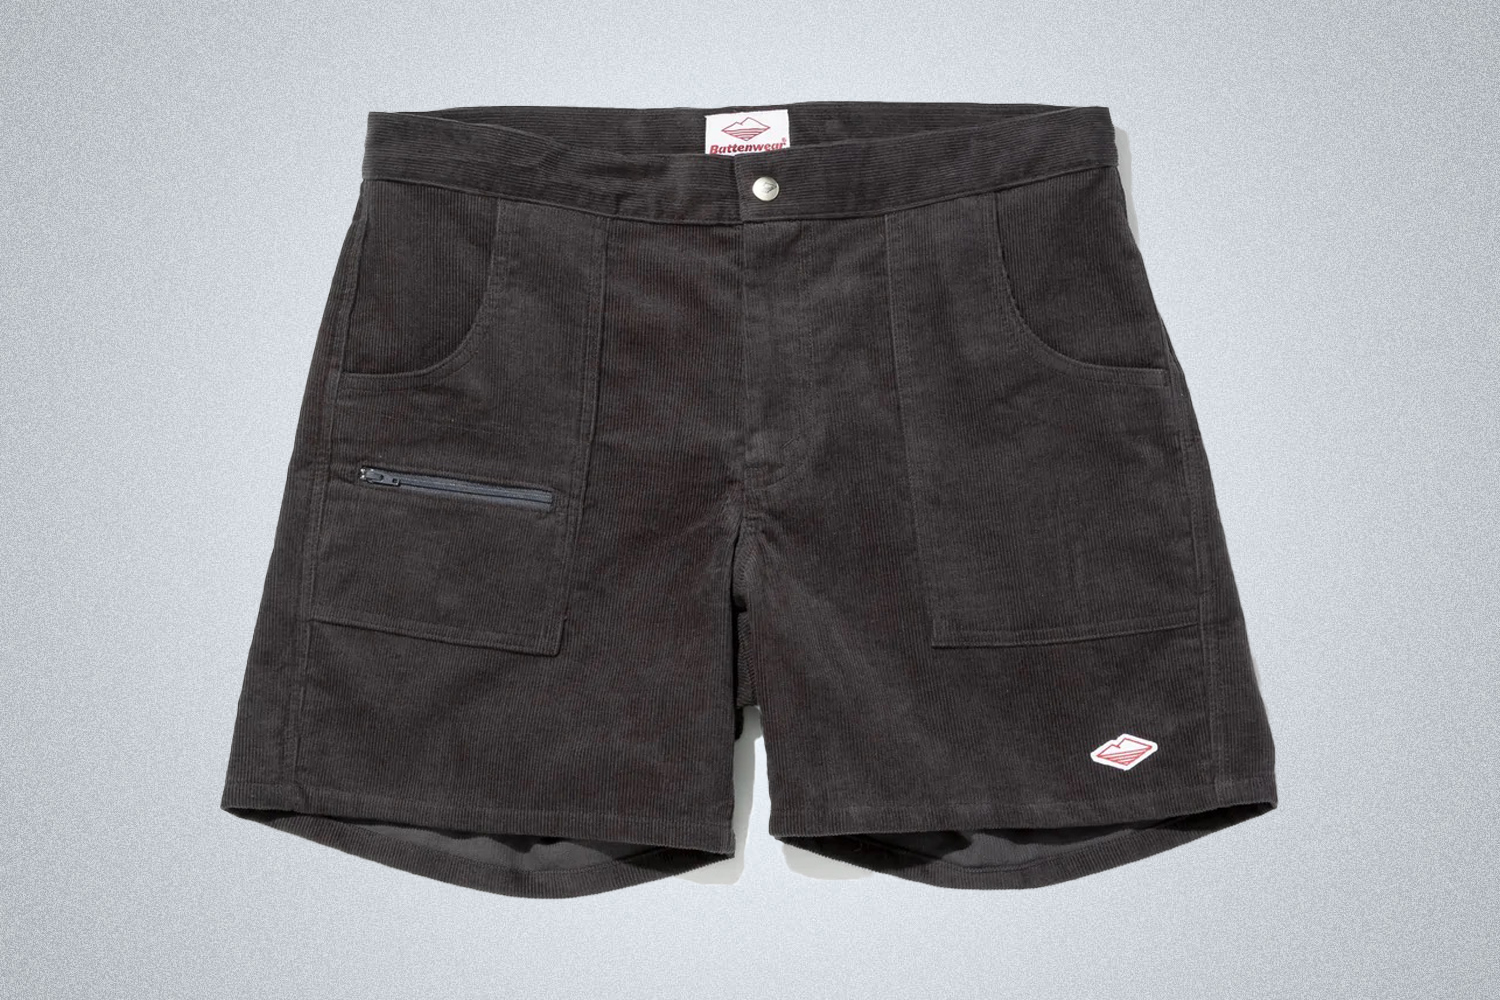 a pair of grey Battenwear corduroy shorts on a grey background